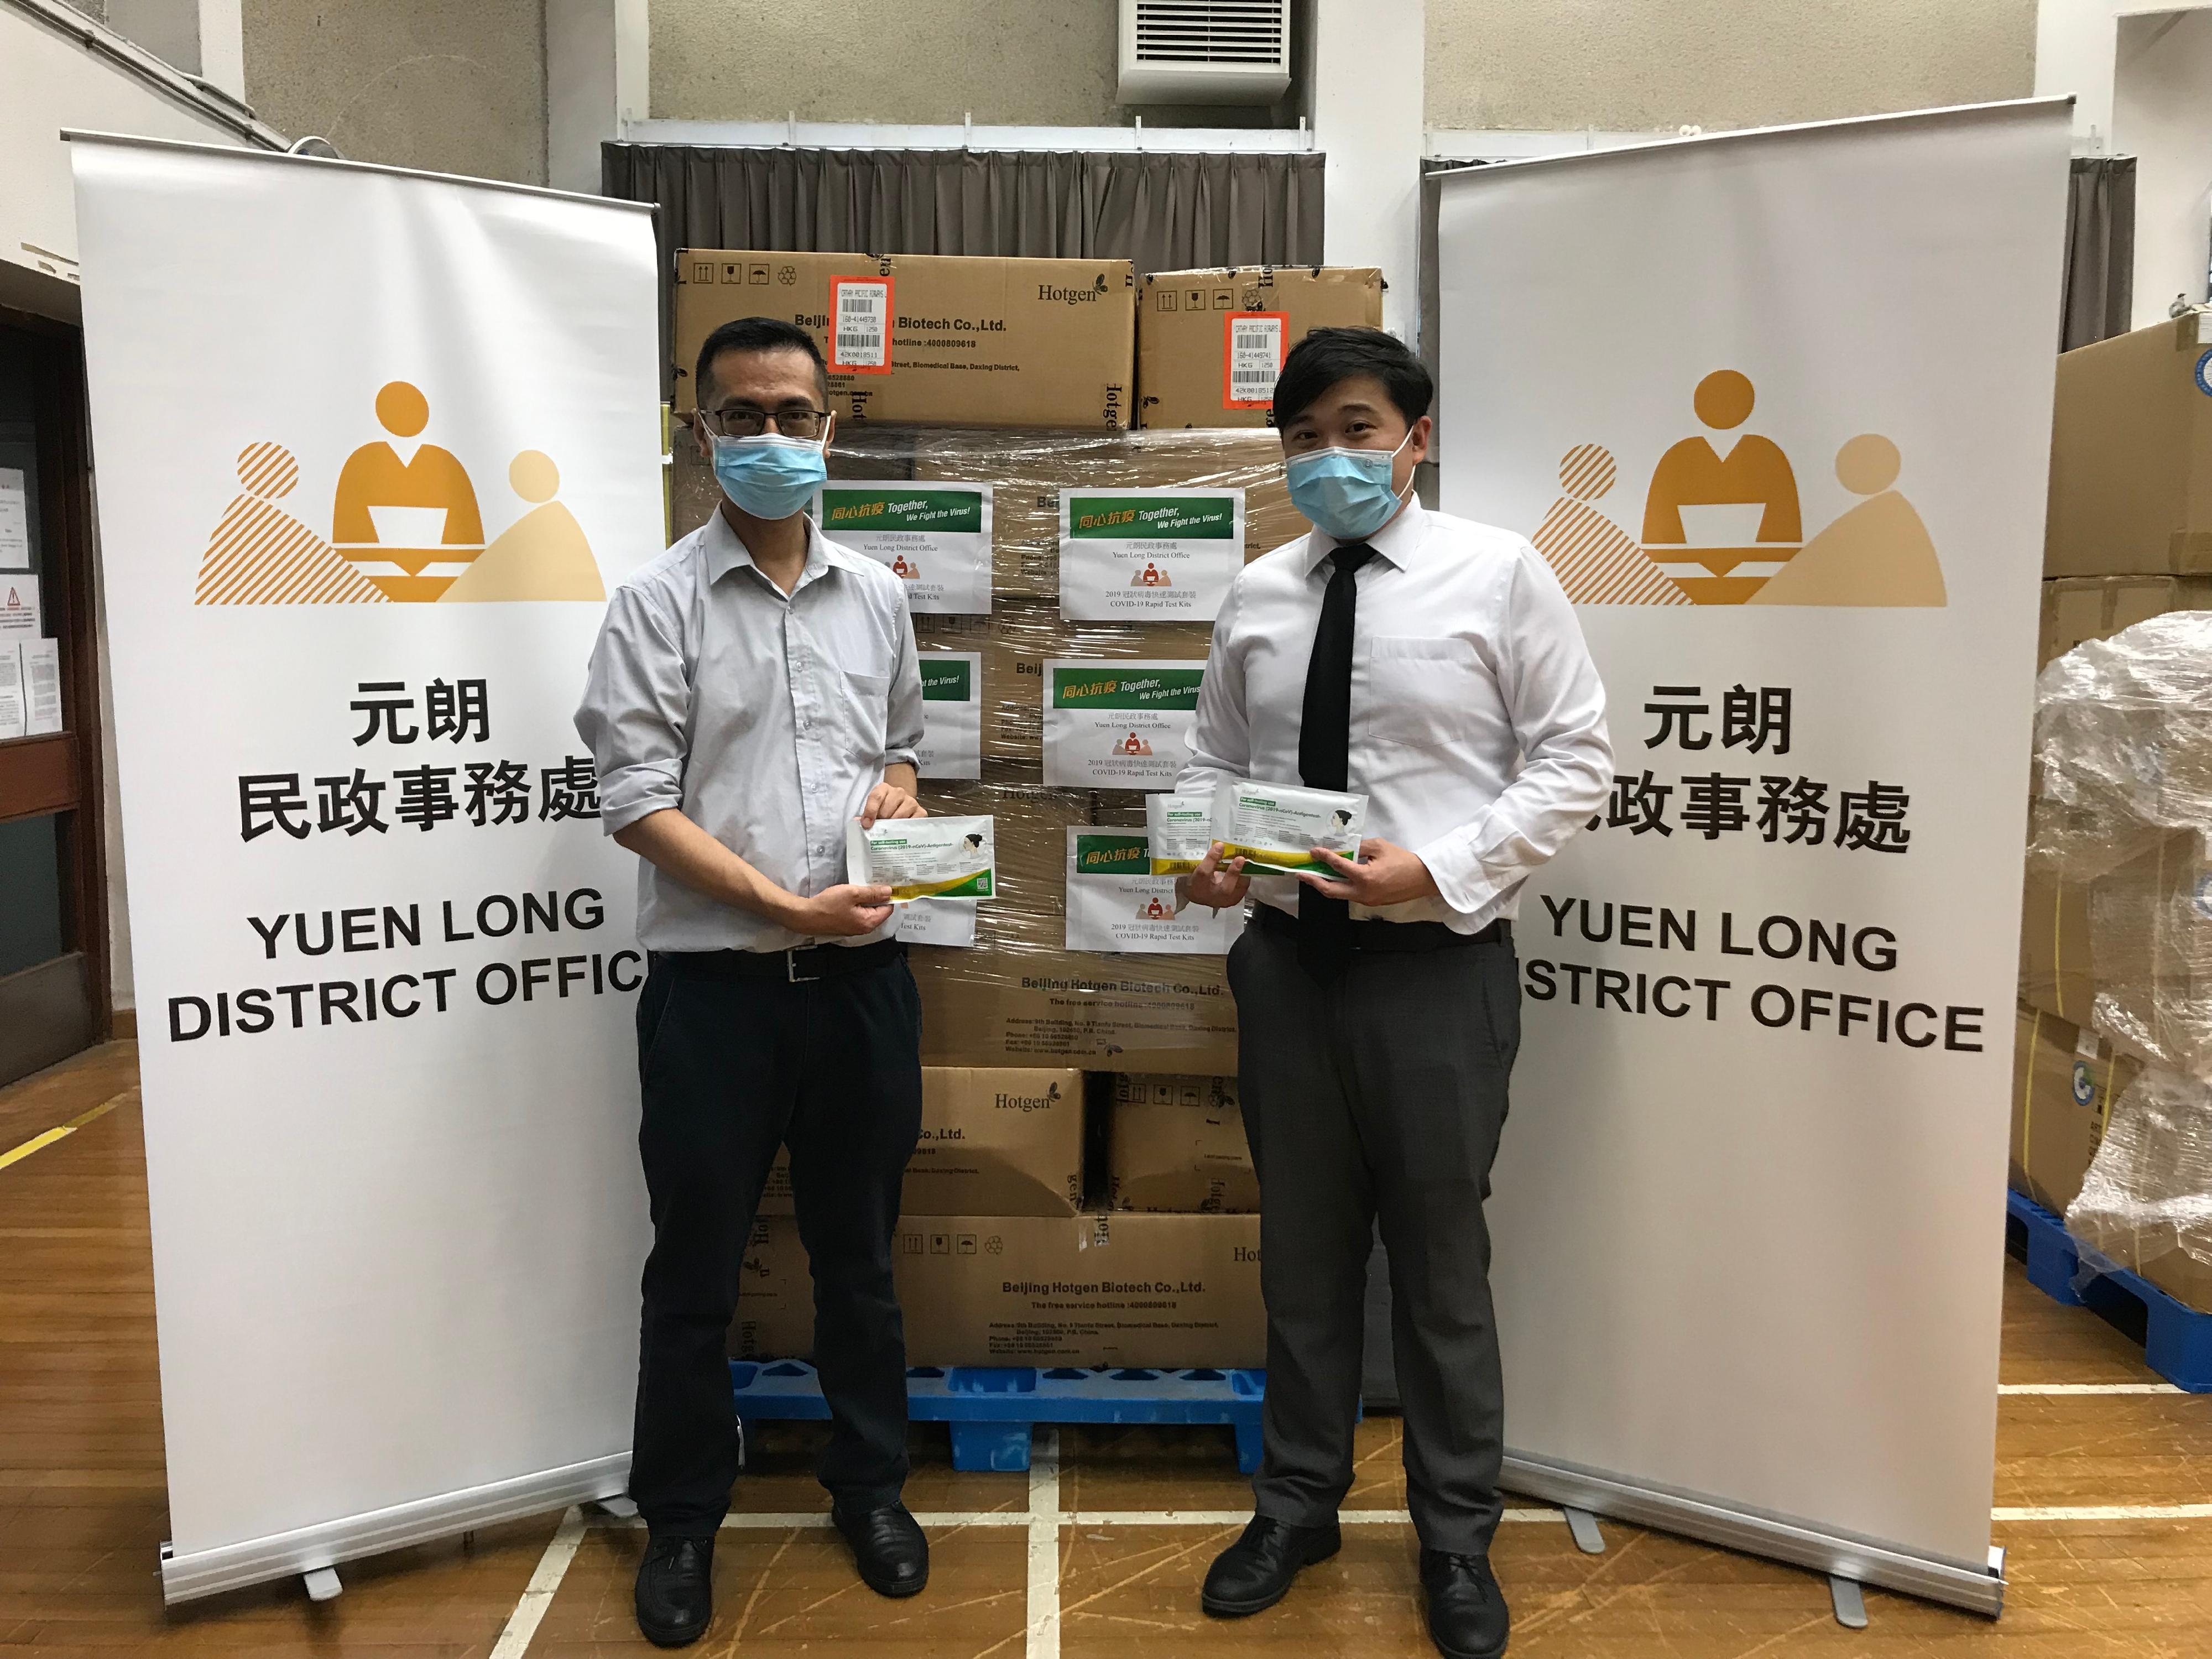 The Yuen Long District Office today (April 29) distributed COVID-19 rapid test kits to households, cleansing workers and property management staff living and working in Central Park Towers and Central Park Towers Phase 2 for voluntary testing through the property management company.